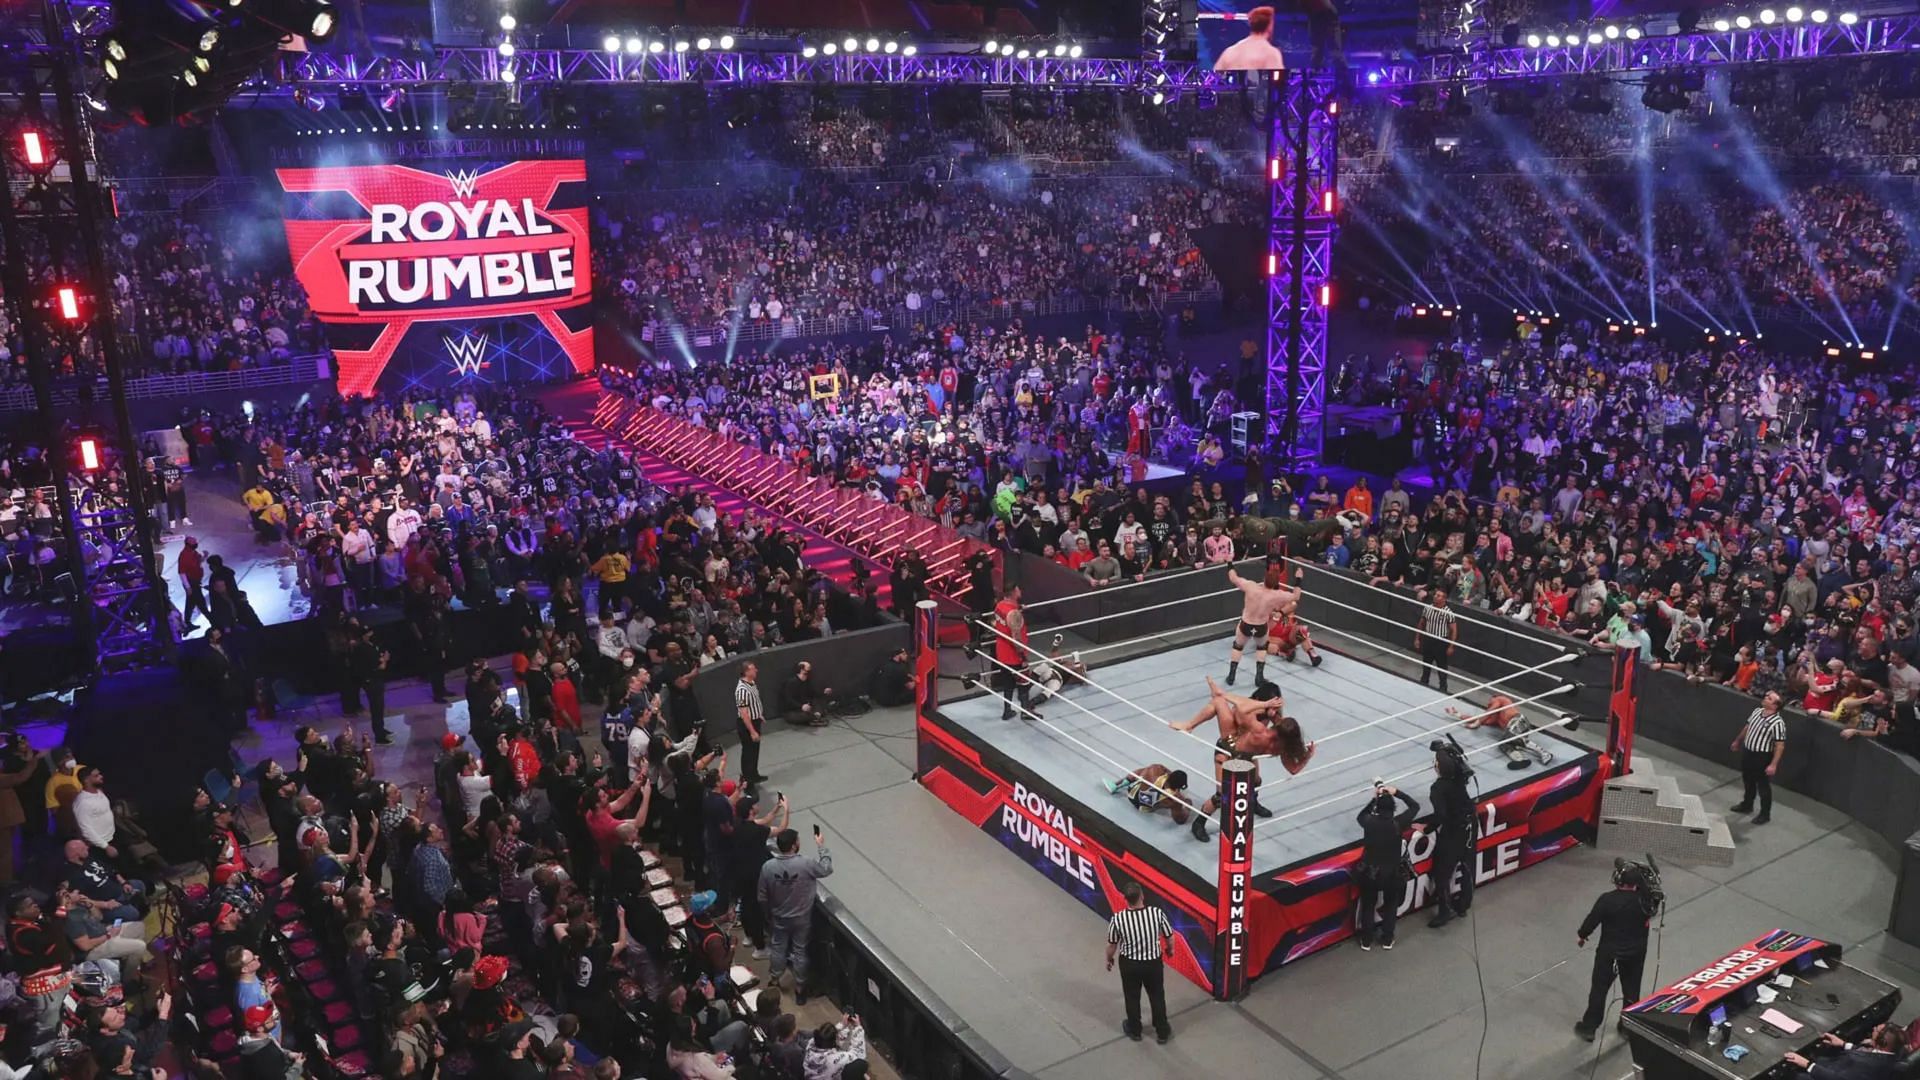 8time champion will win the Men's Royal Rumble match, according to WWE